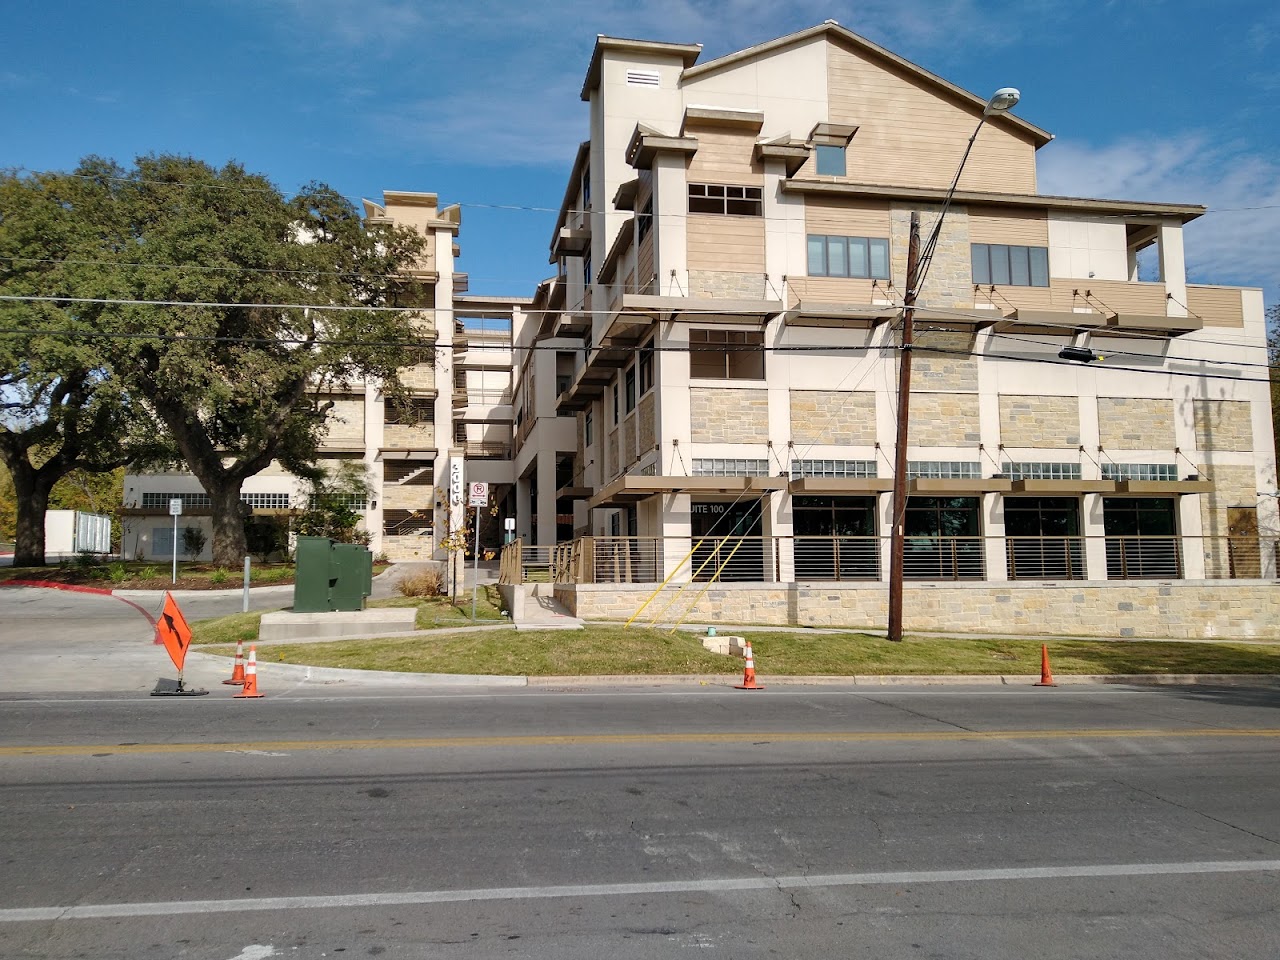 Photo of HOUSING FIRST OAK SPRINGS. Affordable housing located at 3000 OAK SPRINGS AUSTIN, TX 78702